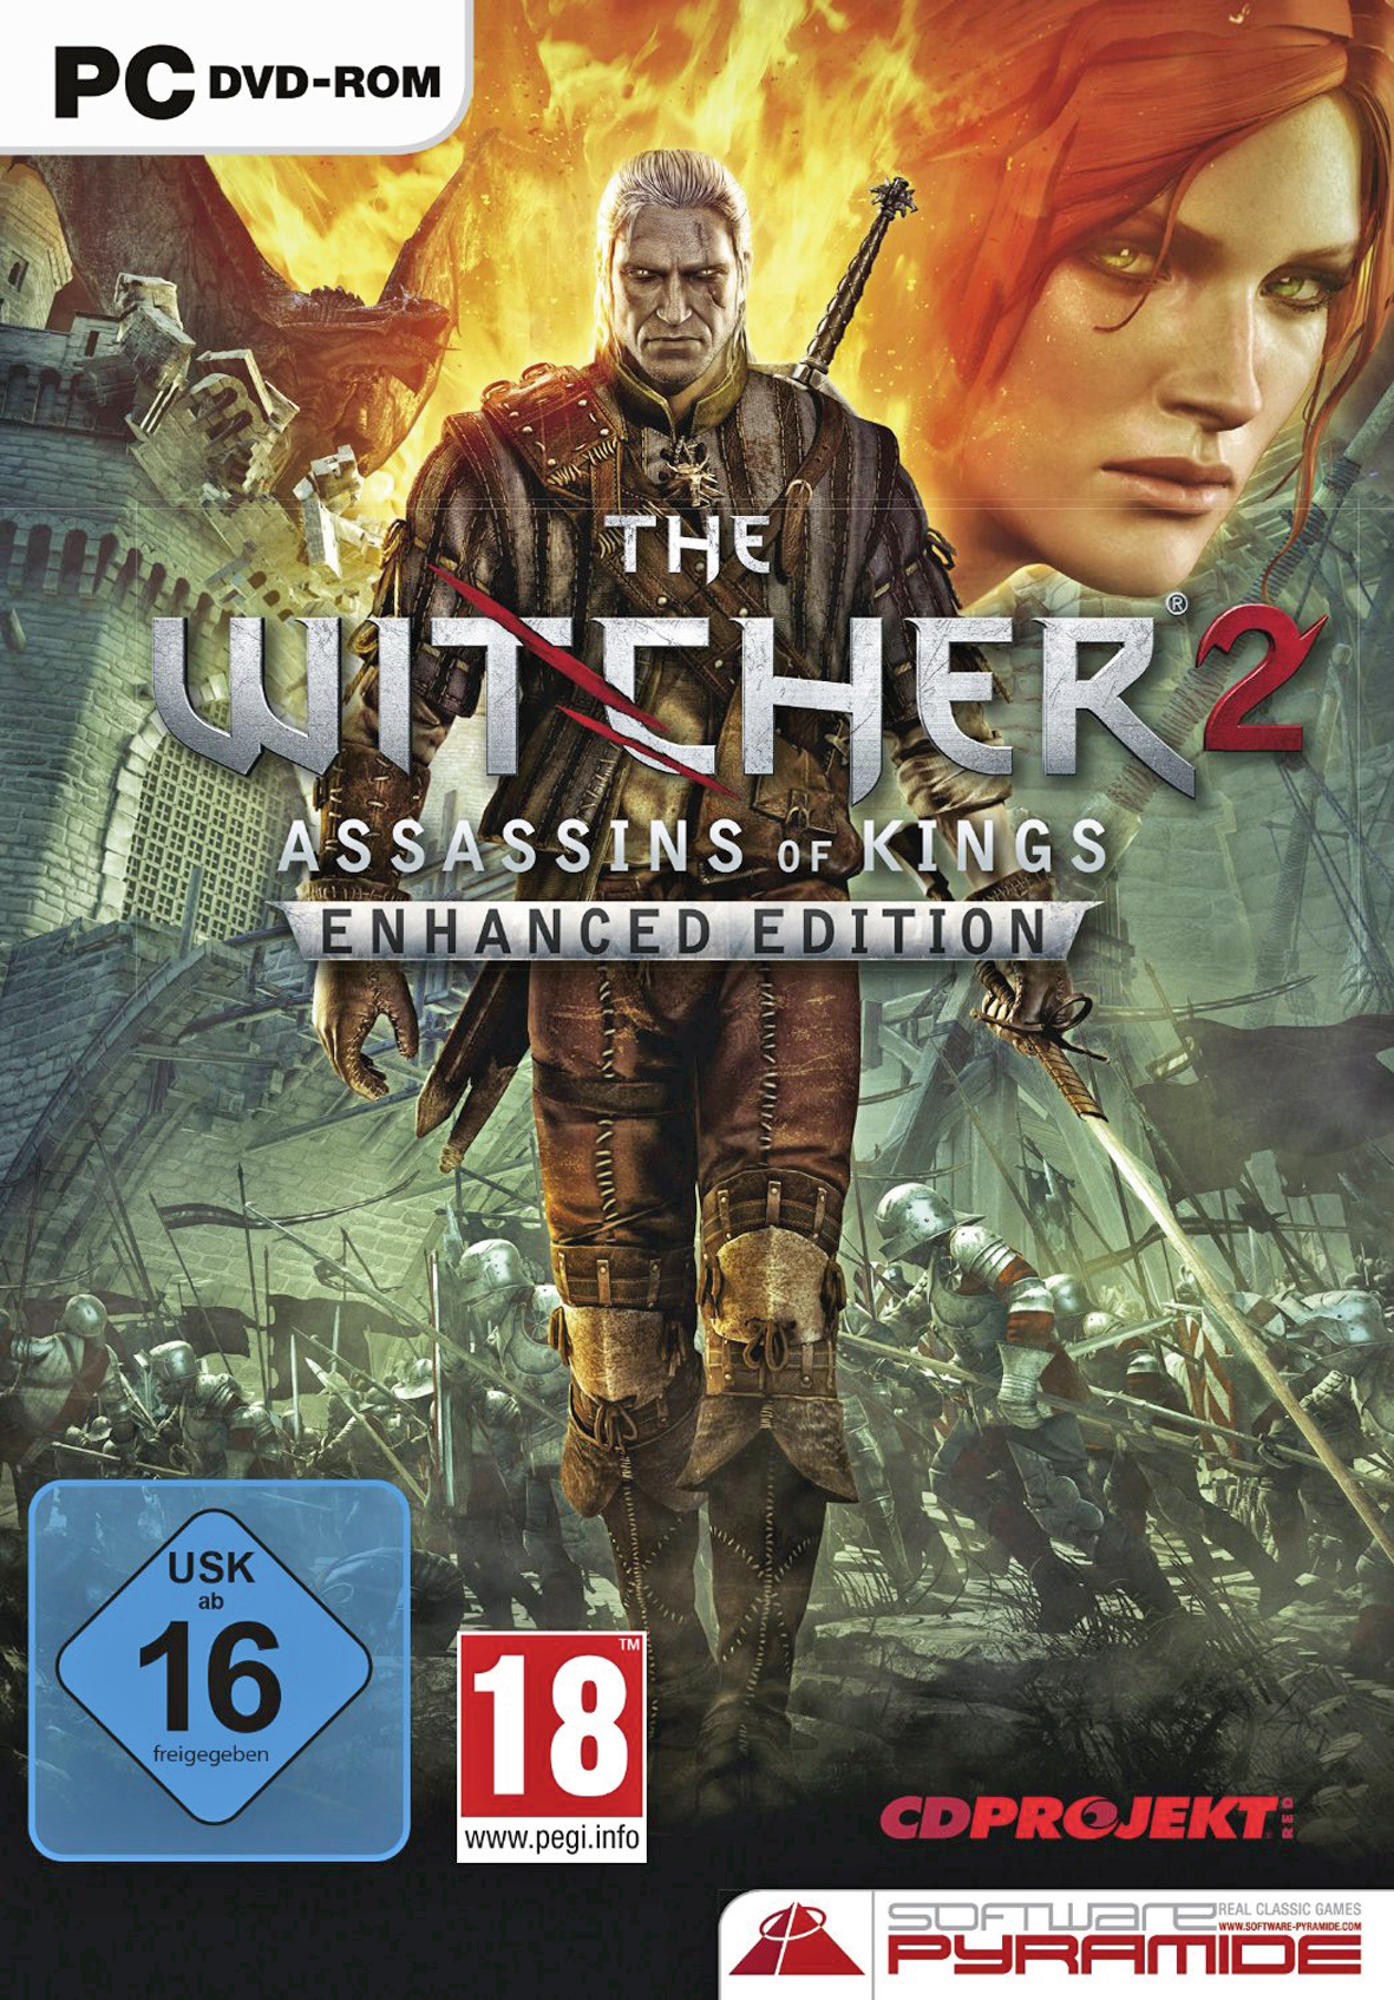 2 - of Witcher Kings - The Assassins [PC]